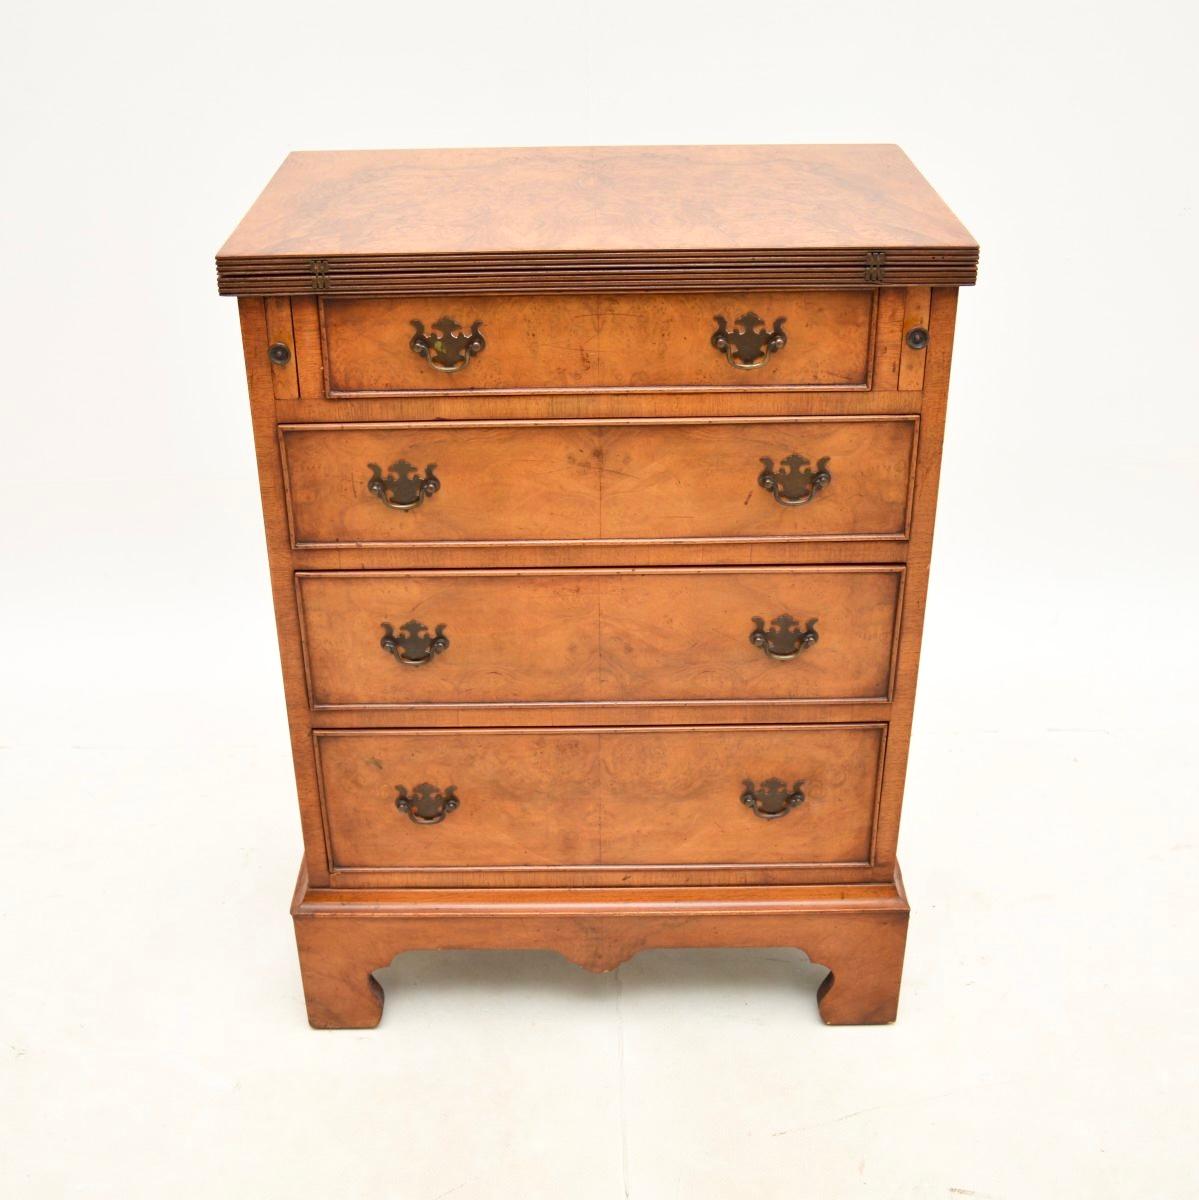 A beautiful and small proportioned antique burr walnut bachelors chest of drawers in excellent original condition & from around the 1930’s period.

It has a lovely warm colour & plenty of character. The top is burr walnut and so are the drawers,